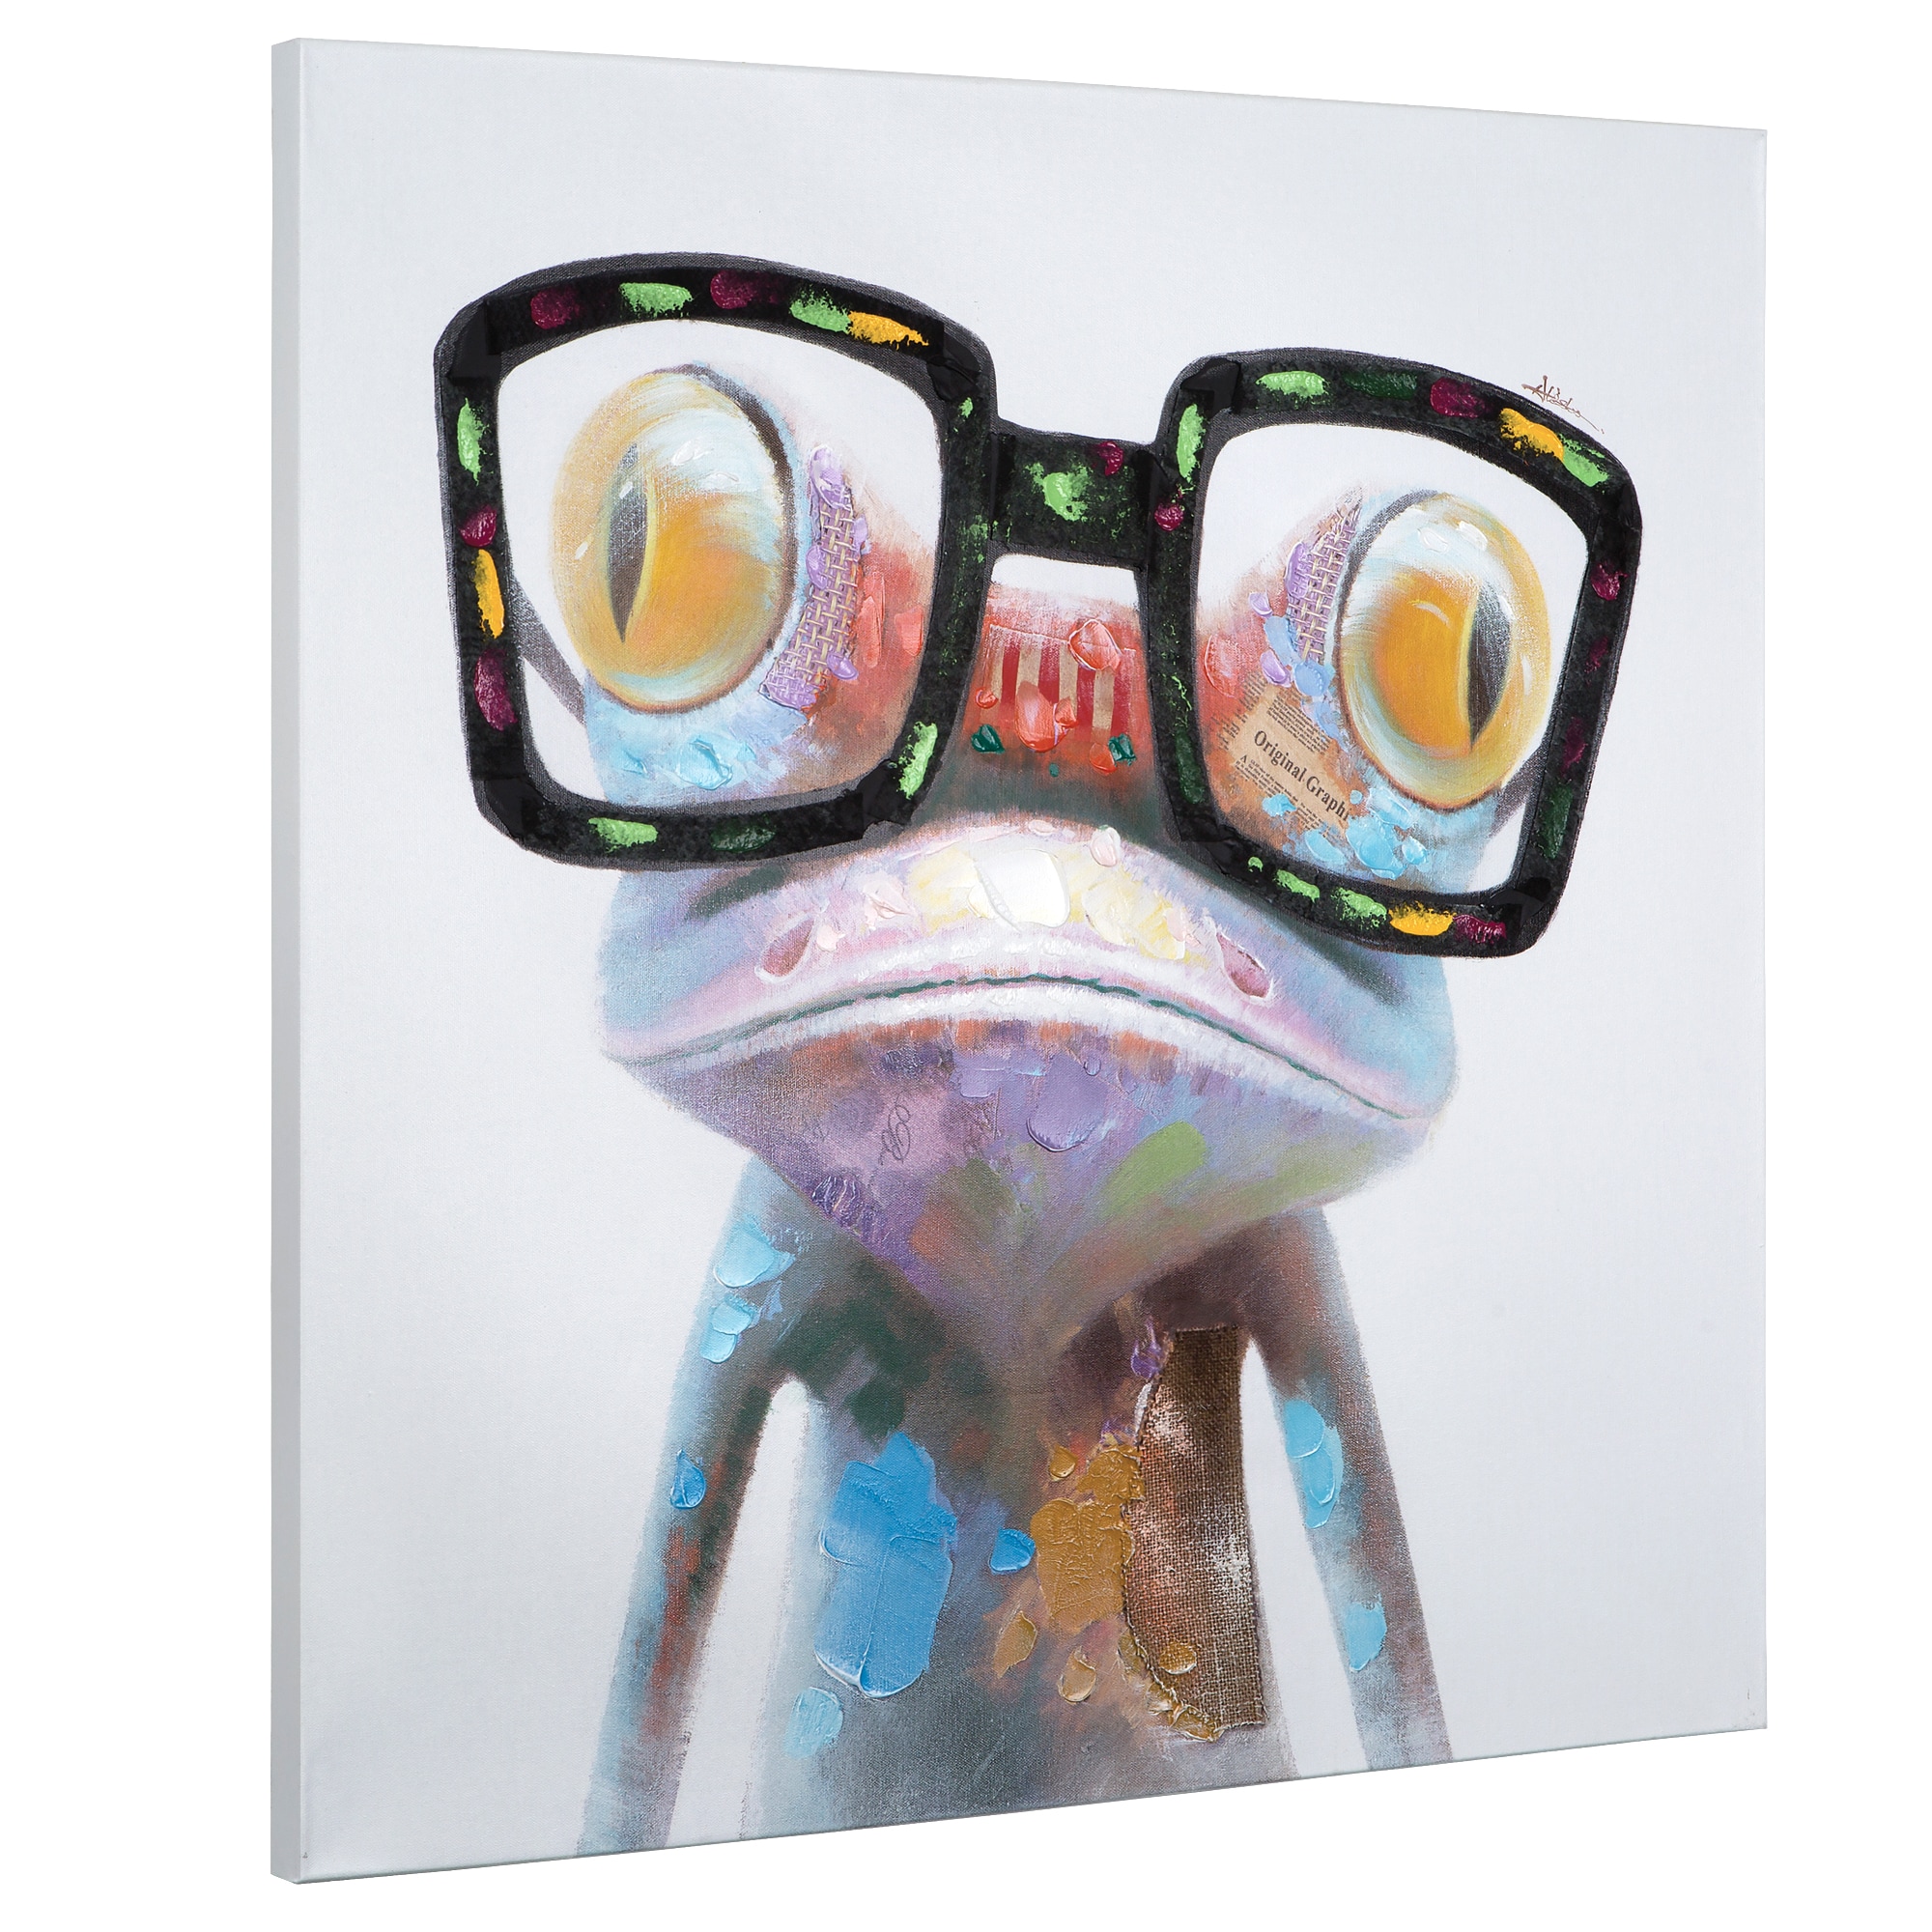 Yosemite Home Decor Hipster Froggy Does Not Apply Wood Framed 40-in H x ...